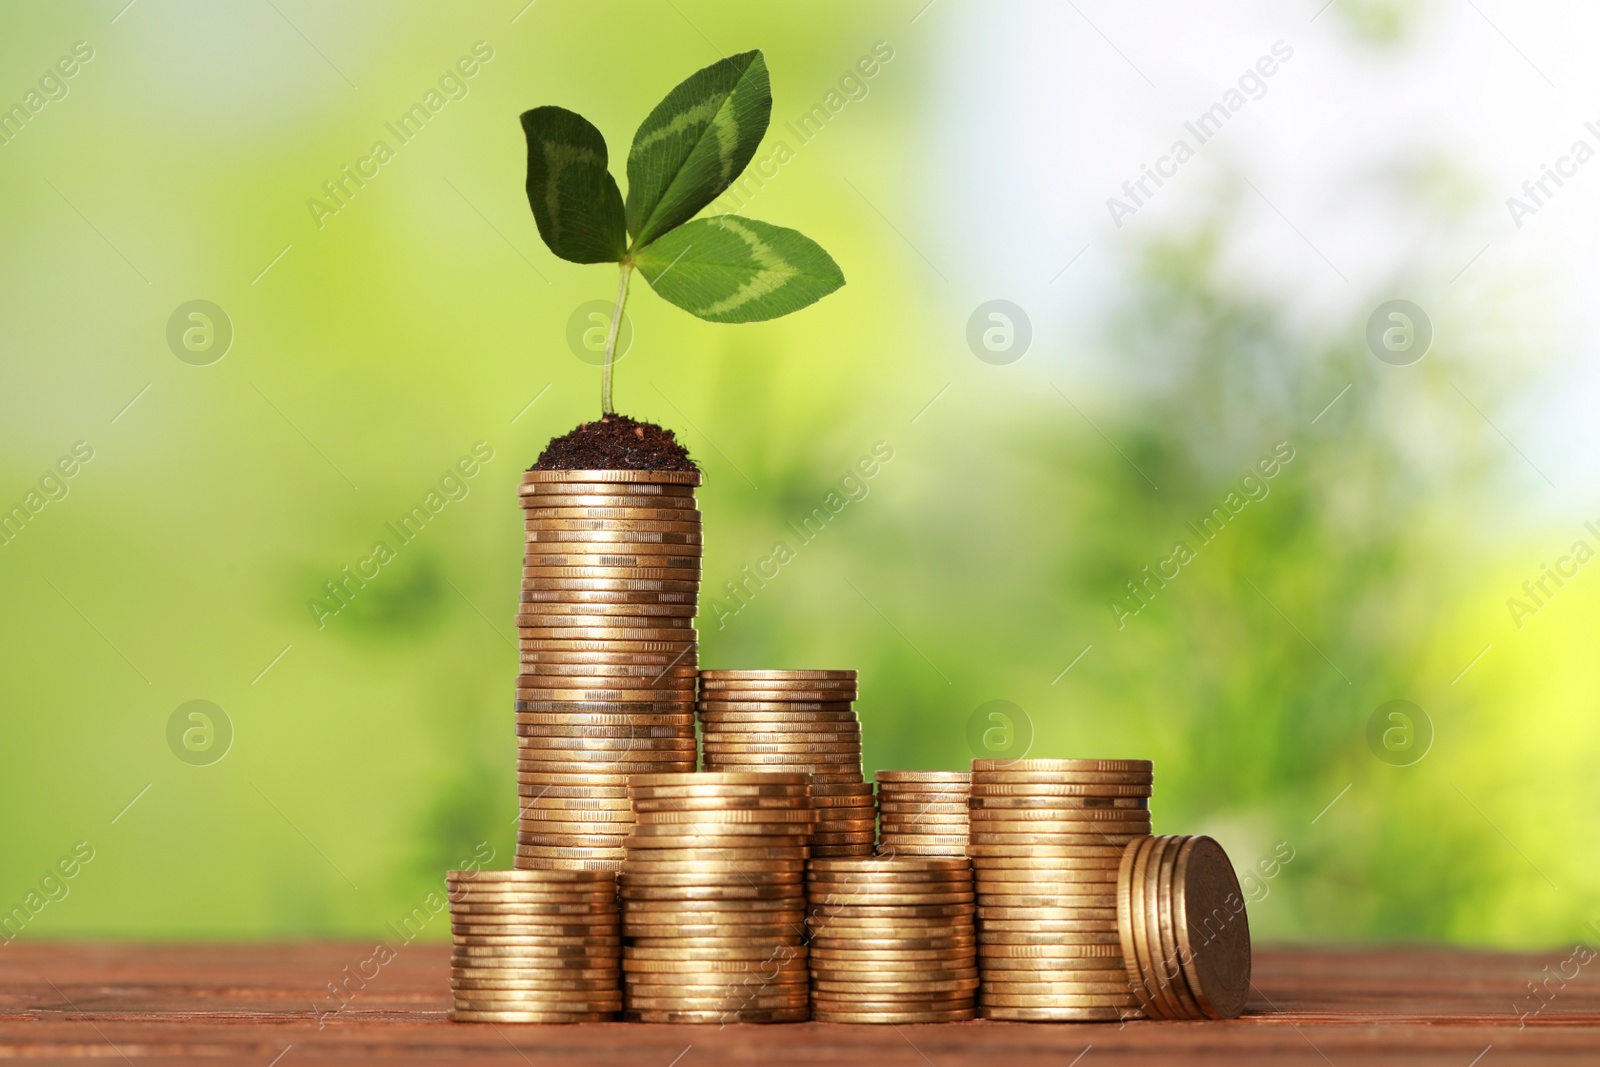 Photo of Stacked coins and green sprout on wooden table against blurred background. Investment concept